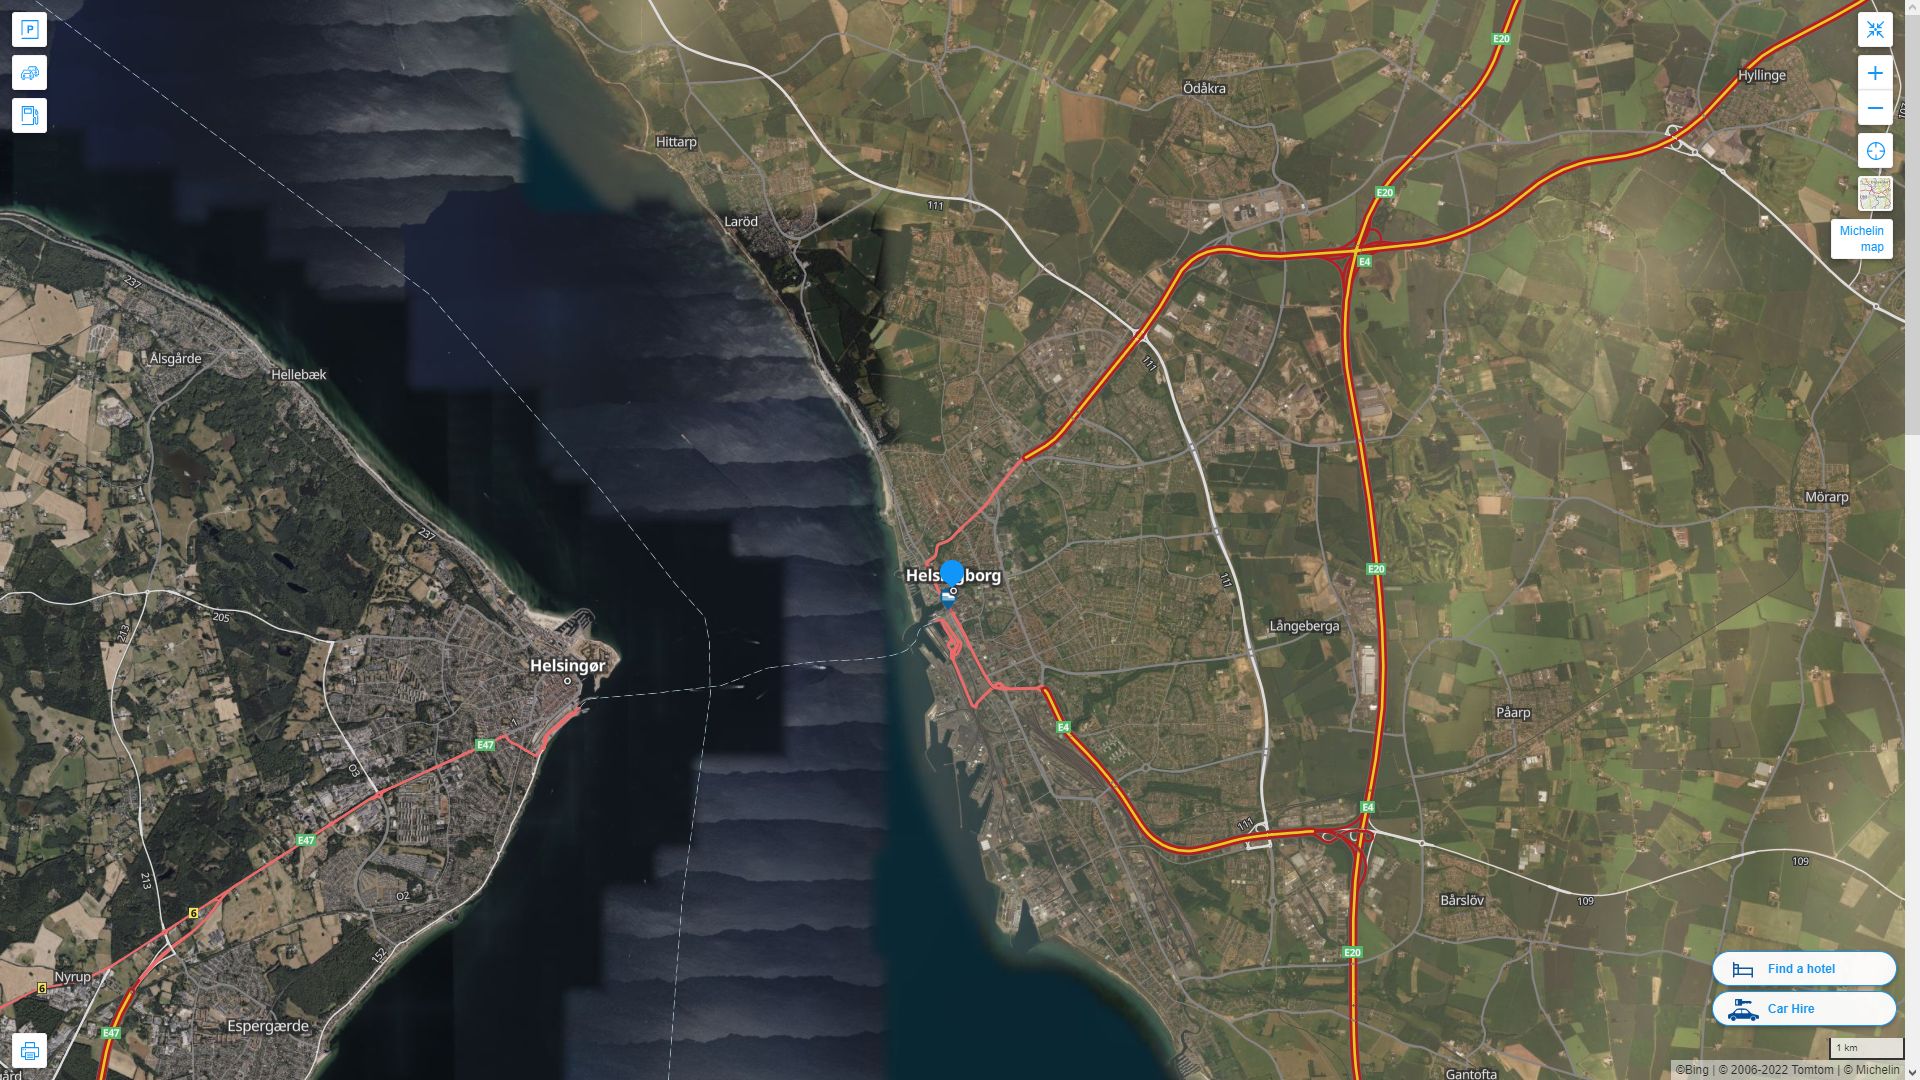 Helsingborg Highway and Road Map with Satellite View